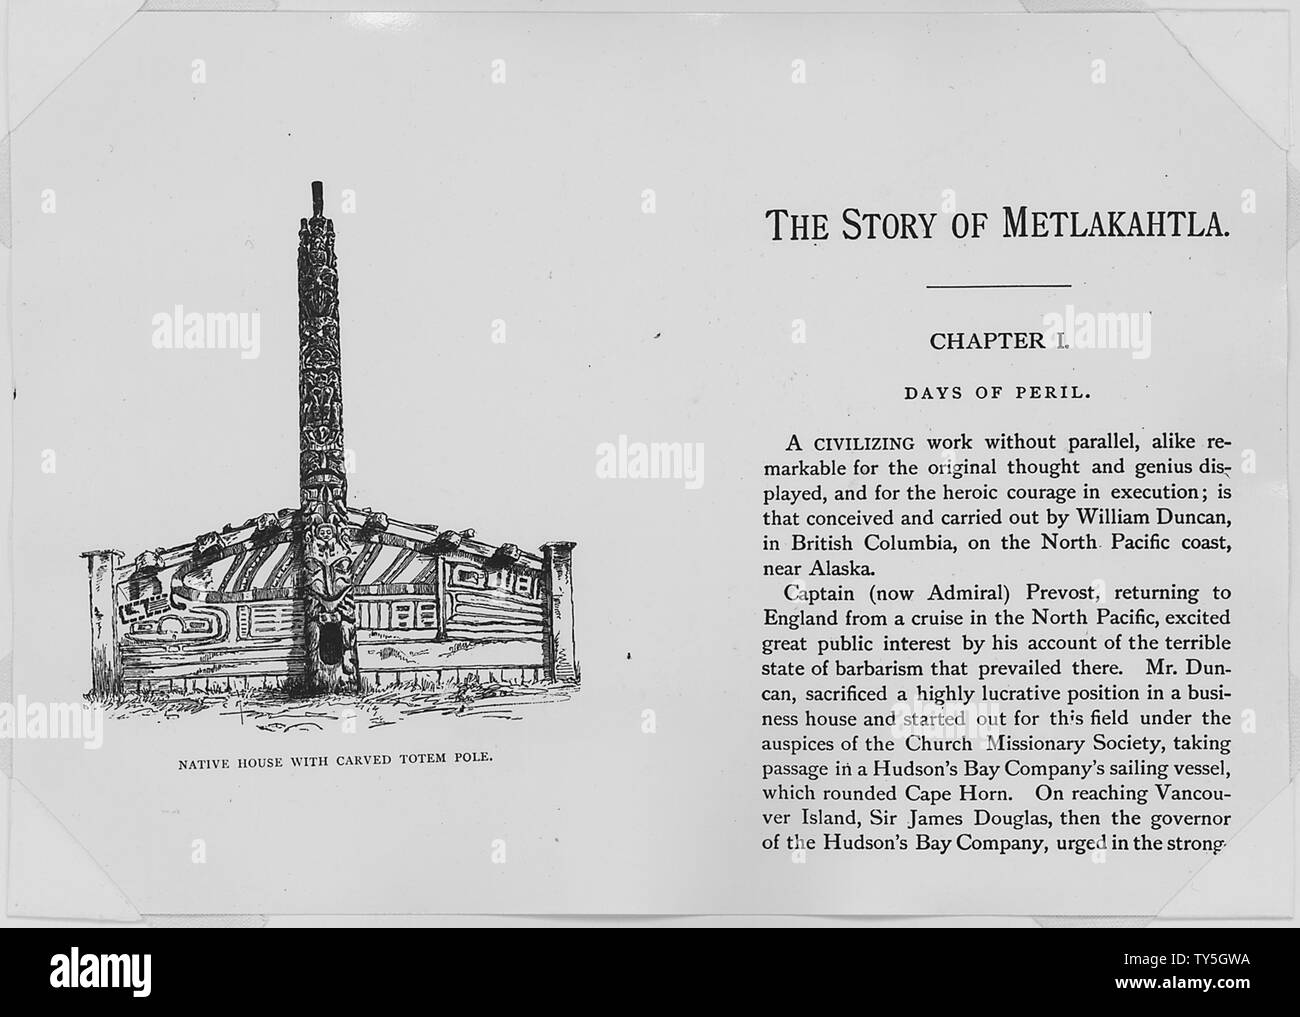 Henry S. Wellcome, The Story of Metlakahtla, 4th. edn., London and New York, 1887. Frontispiece and first page. Stock Photo